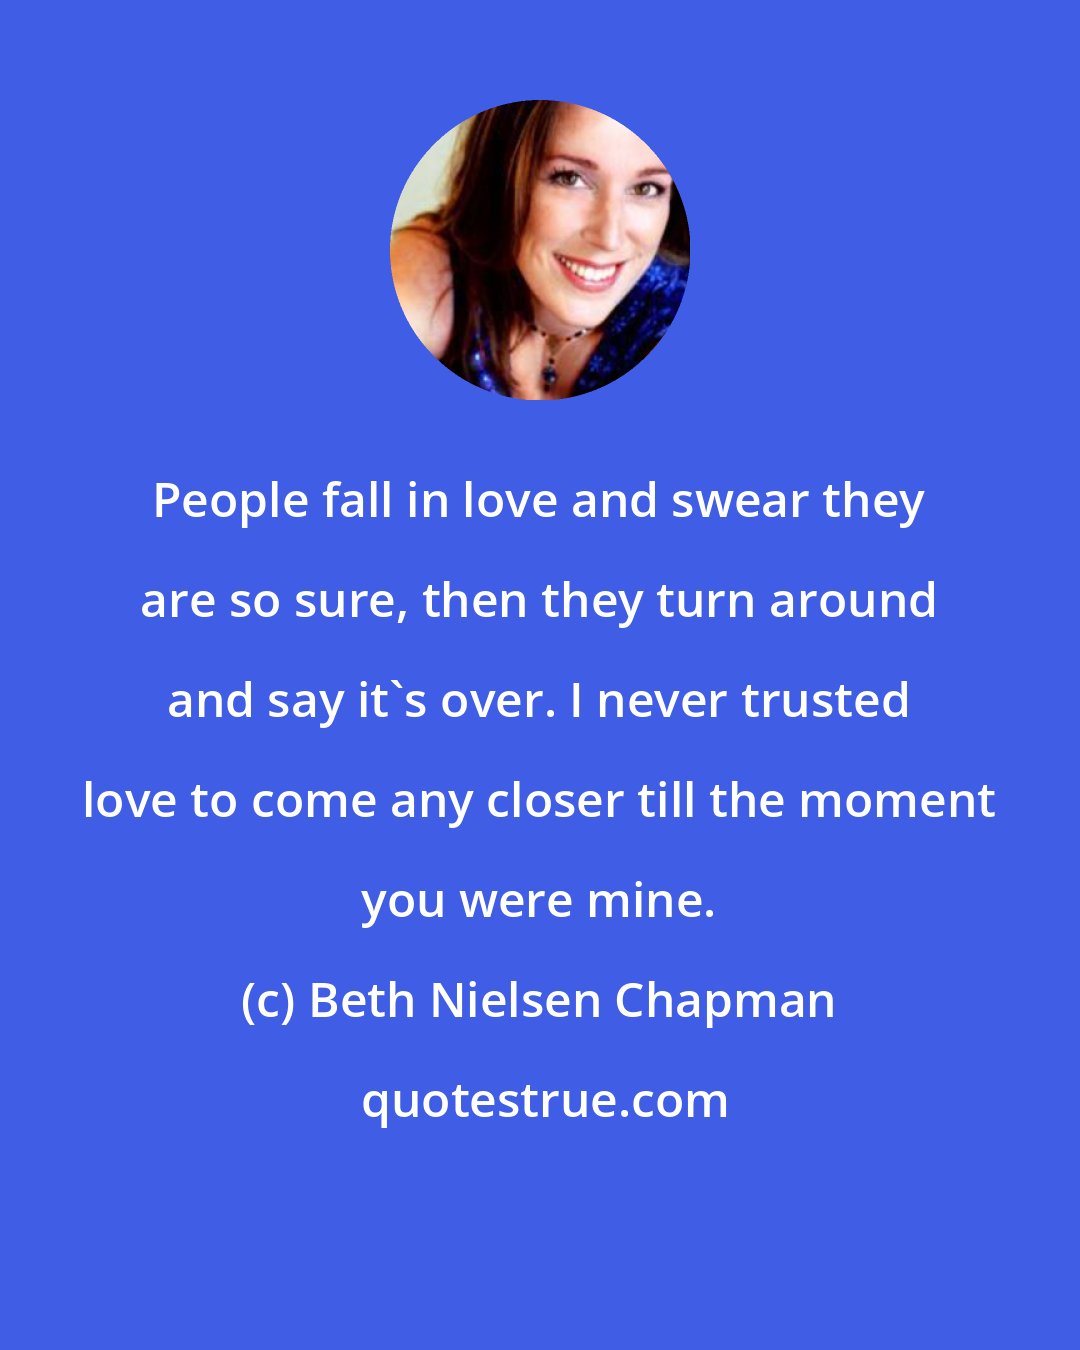 Beth Nielsen Chapman: People fall in love and swear they are so sure, then they turn around and say it's over. I never trusted love to come any closer till the moment you were mine.